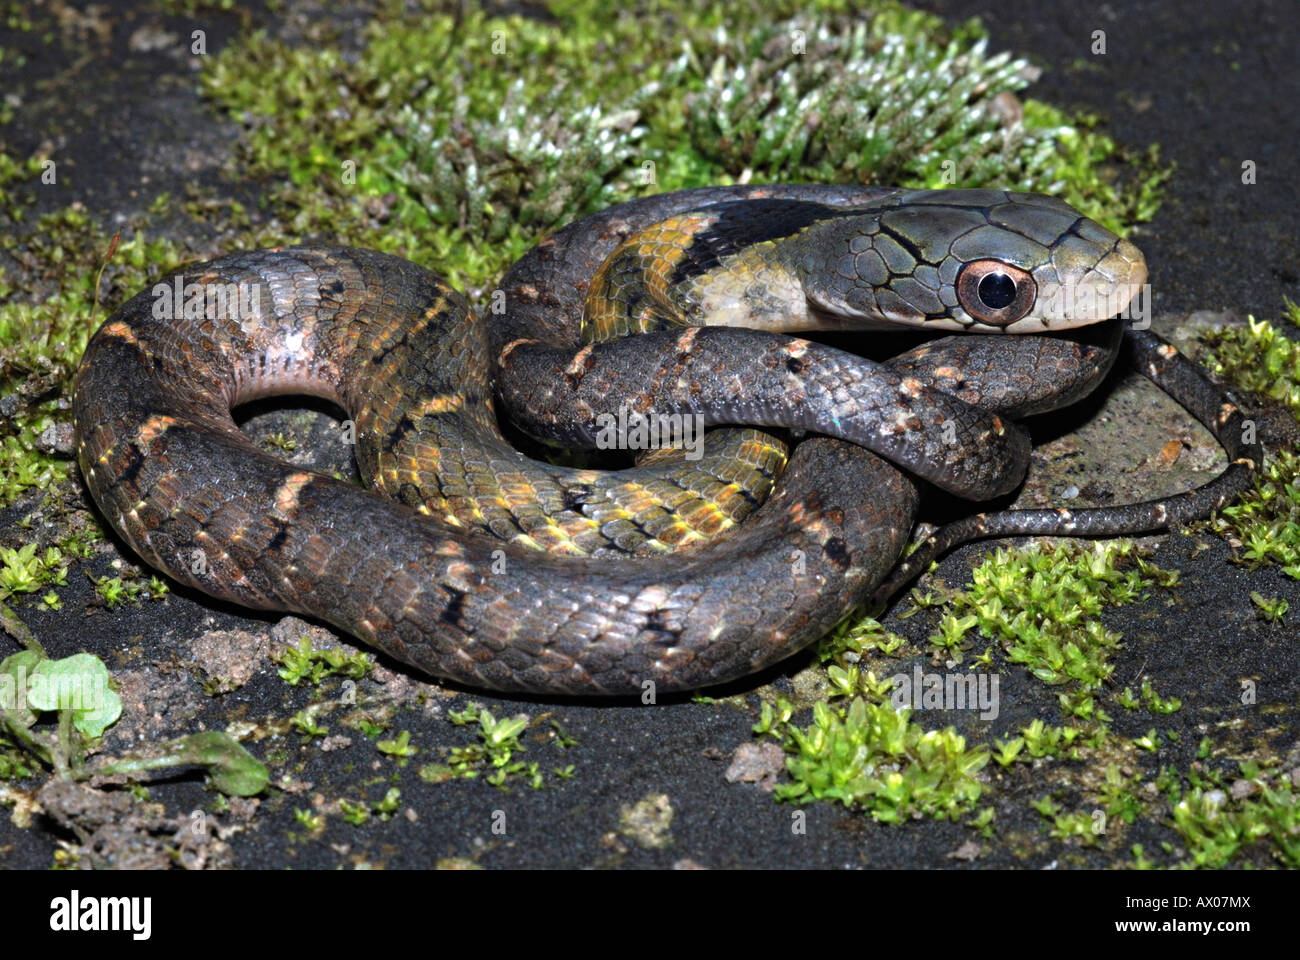 FALSE WATER COBRA . Hydrodynastes gigas. A colubrid snake which can mimic of elapid cobra very well. Stock Photo